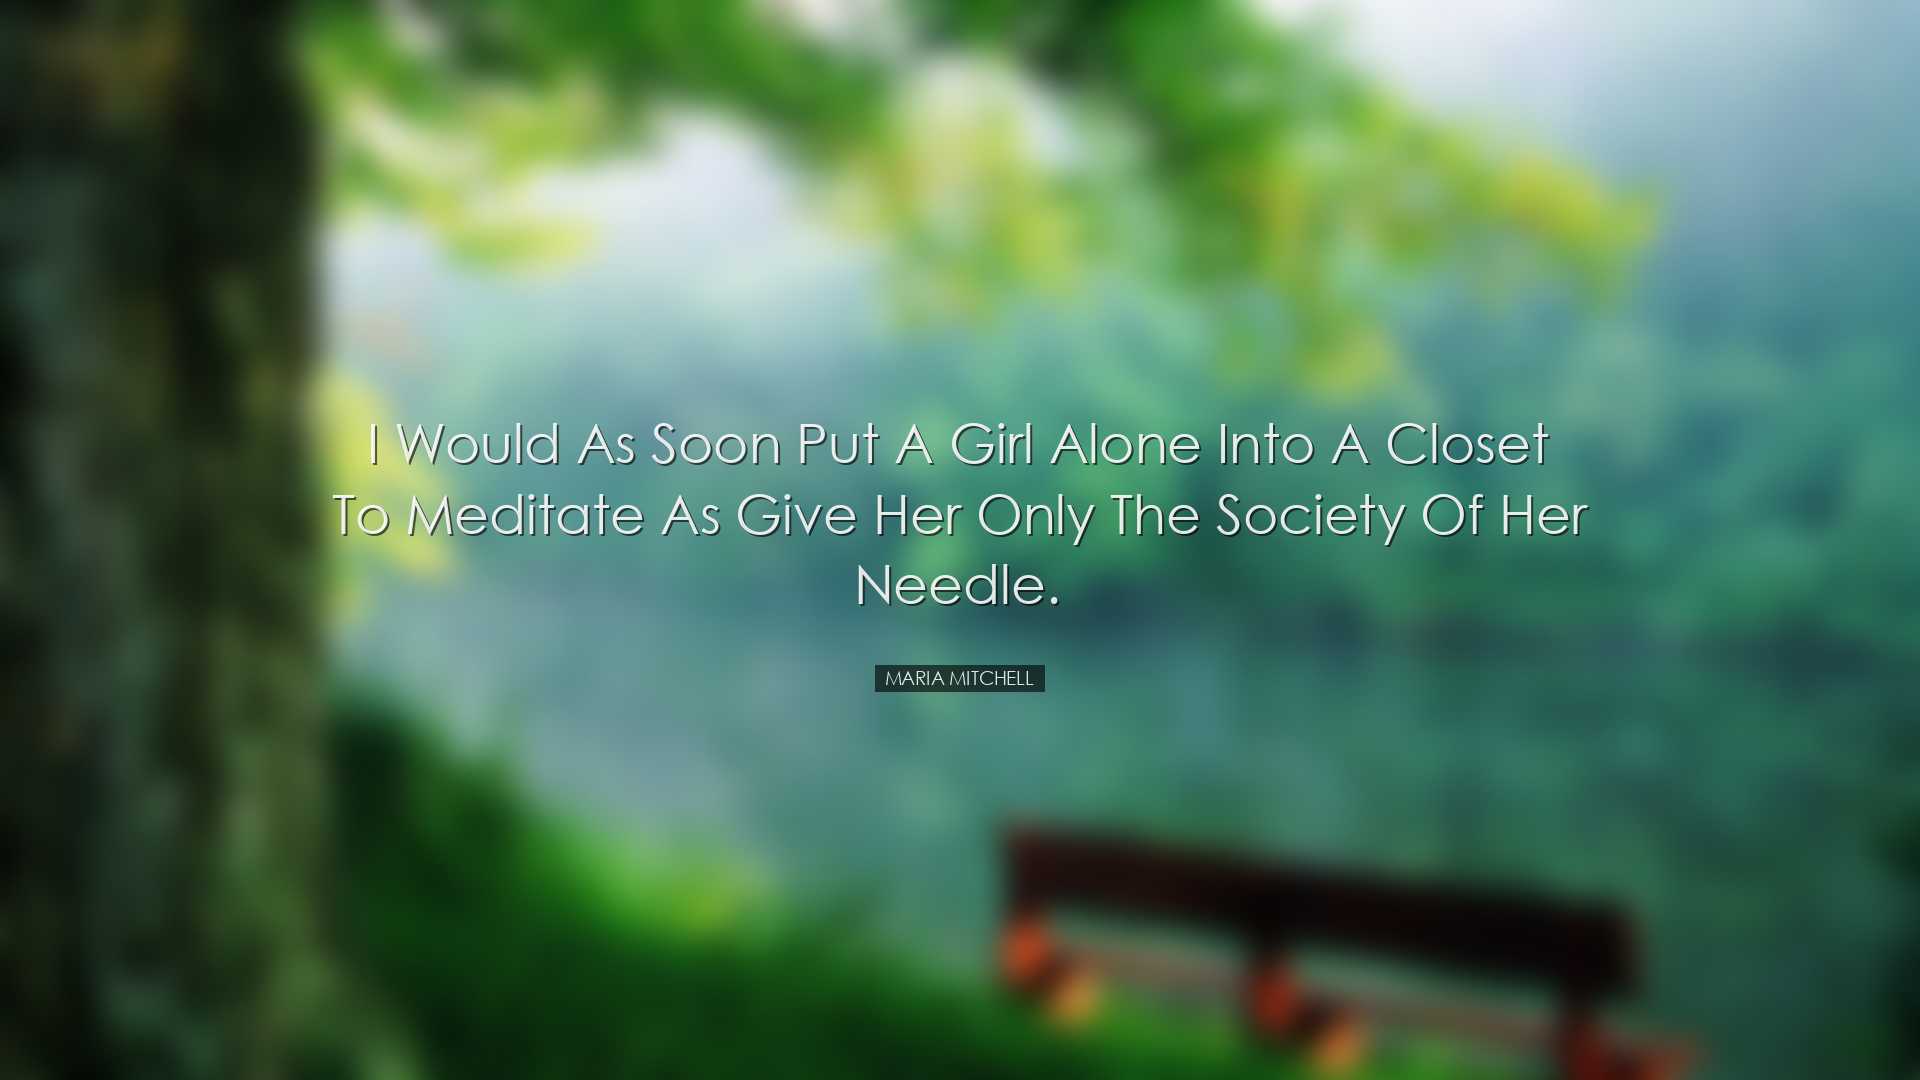 I would as soon put a girl alone into a closet to meditate as give